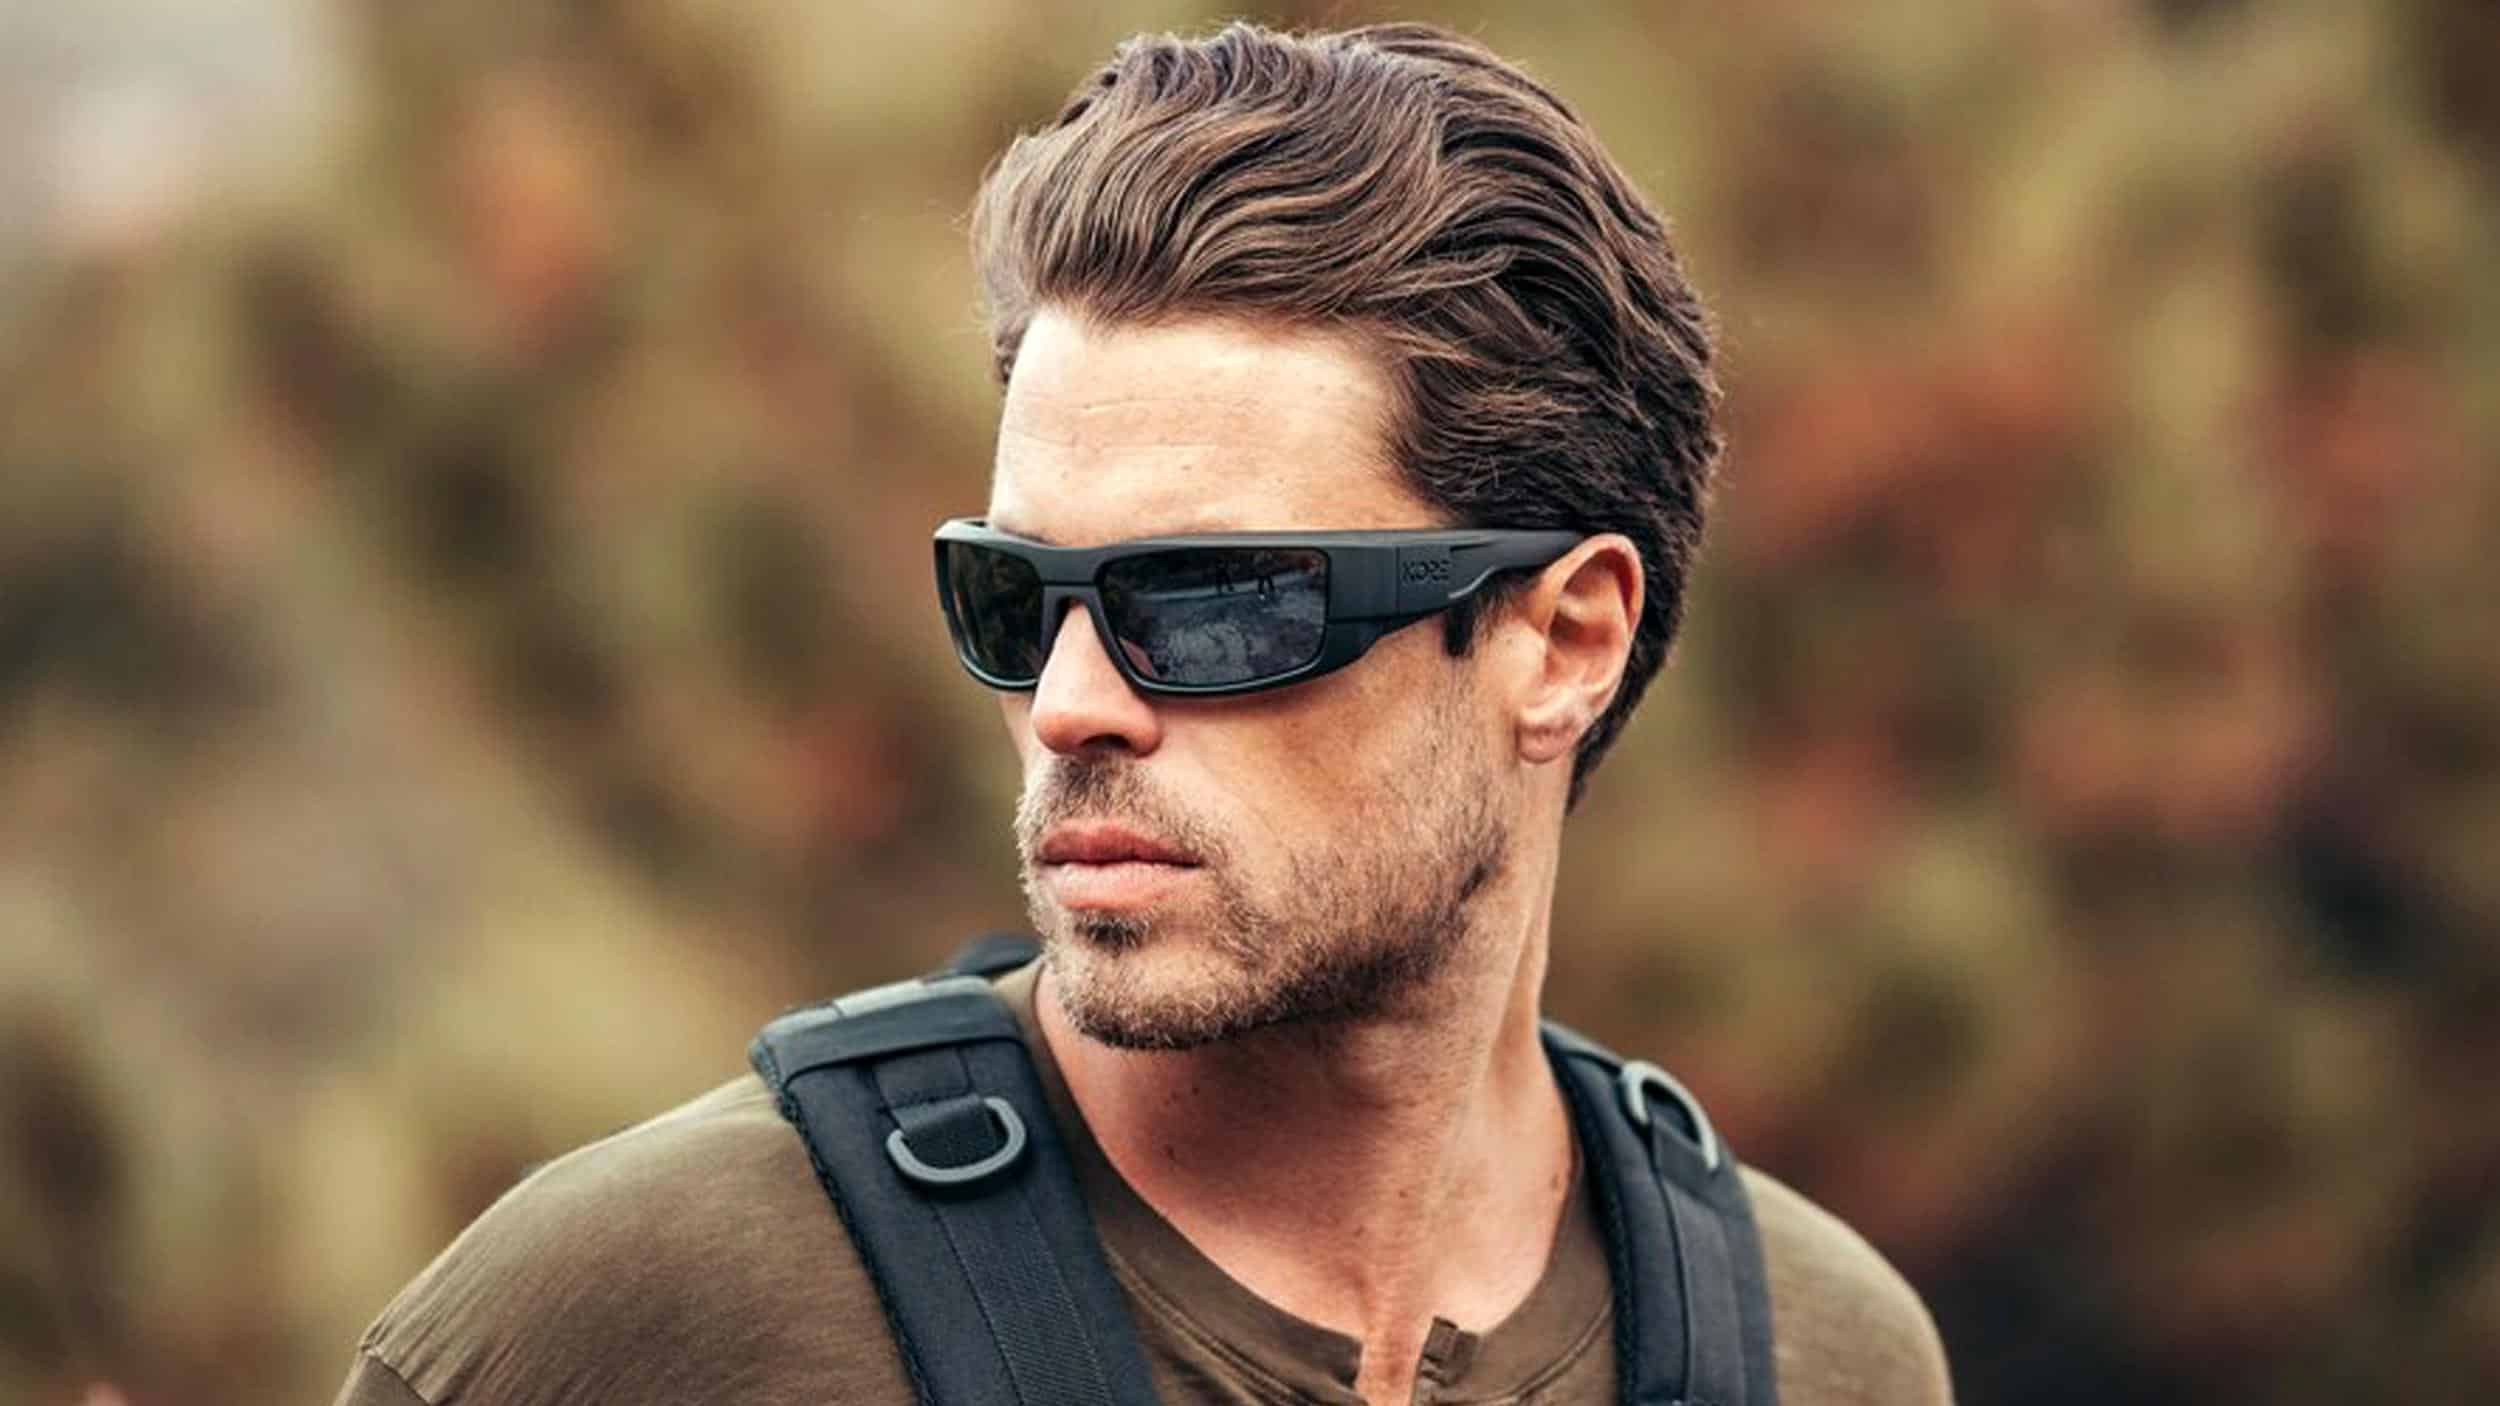 Bulletproof Shooting Glasses: What You Need To Know Header